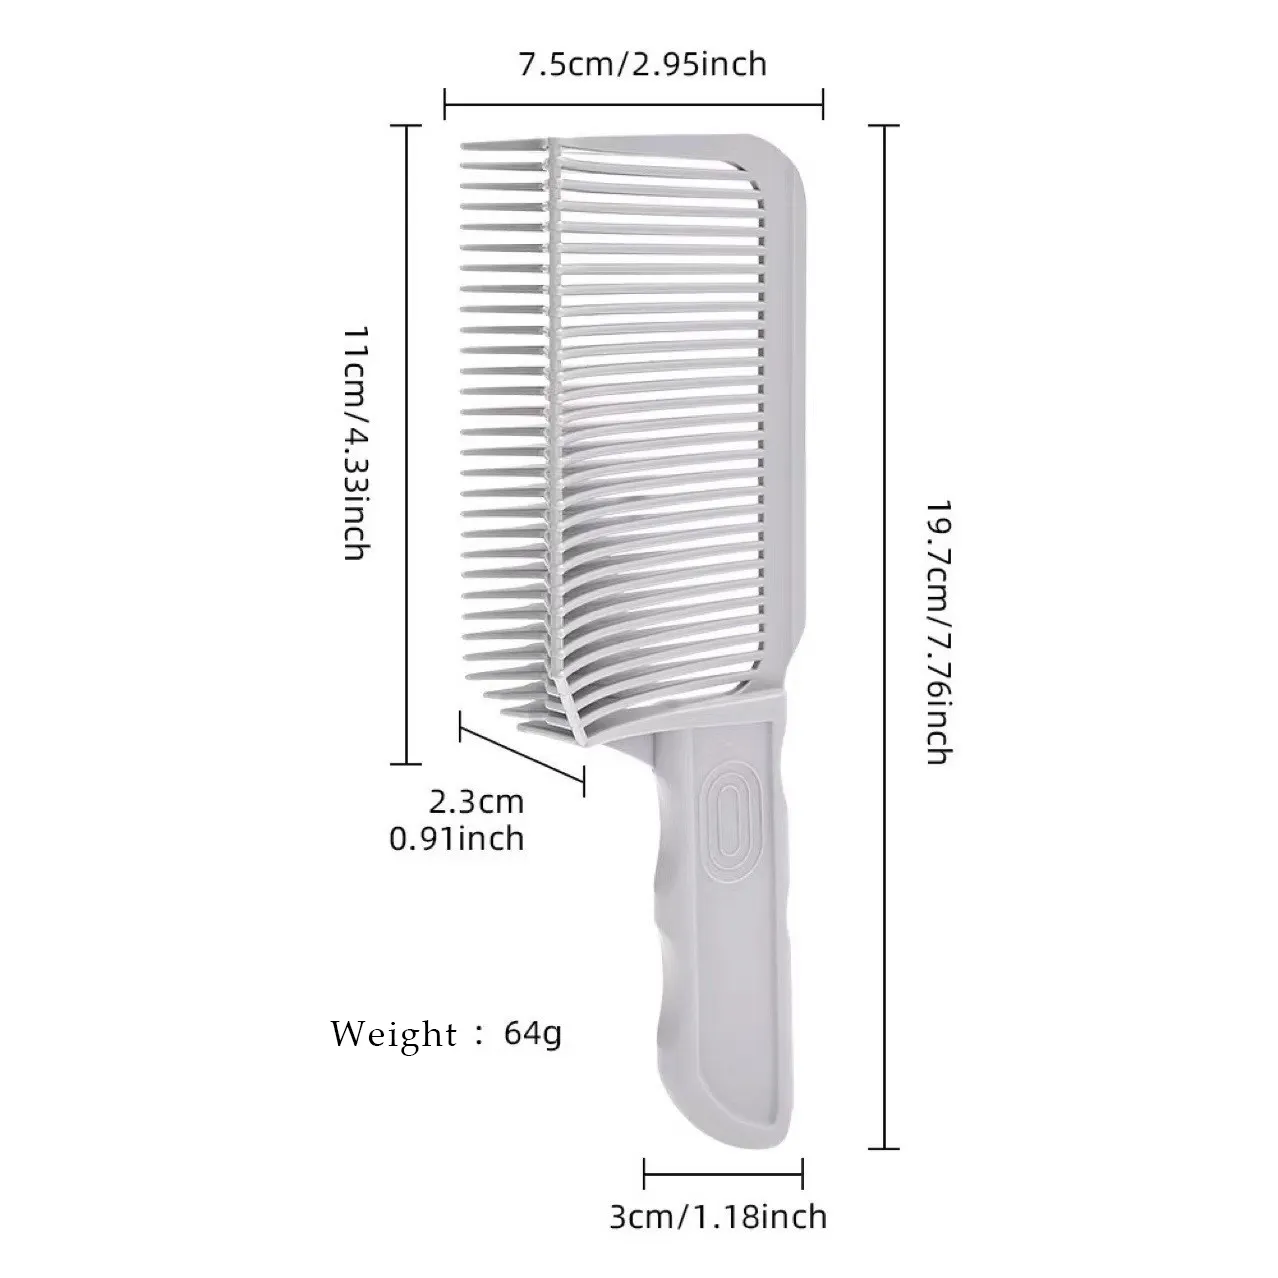 Professional Barber Clipper Heat Resistant Fade Brush Salon Styling Tool Blending Flat Top Hair Cutting Comb For Men